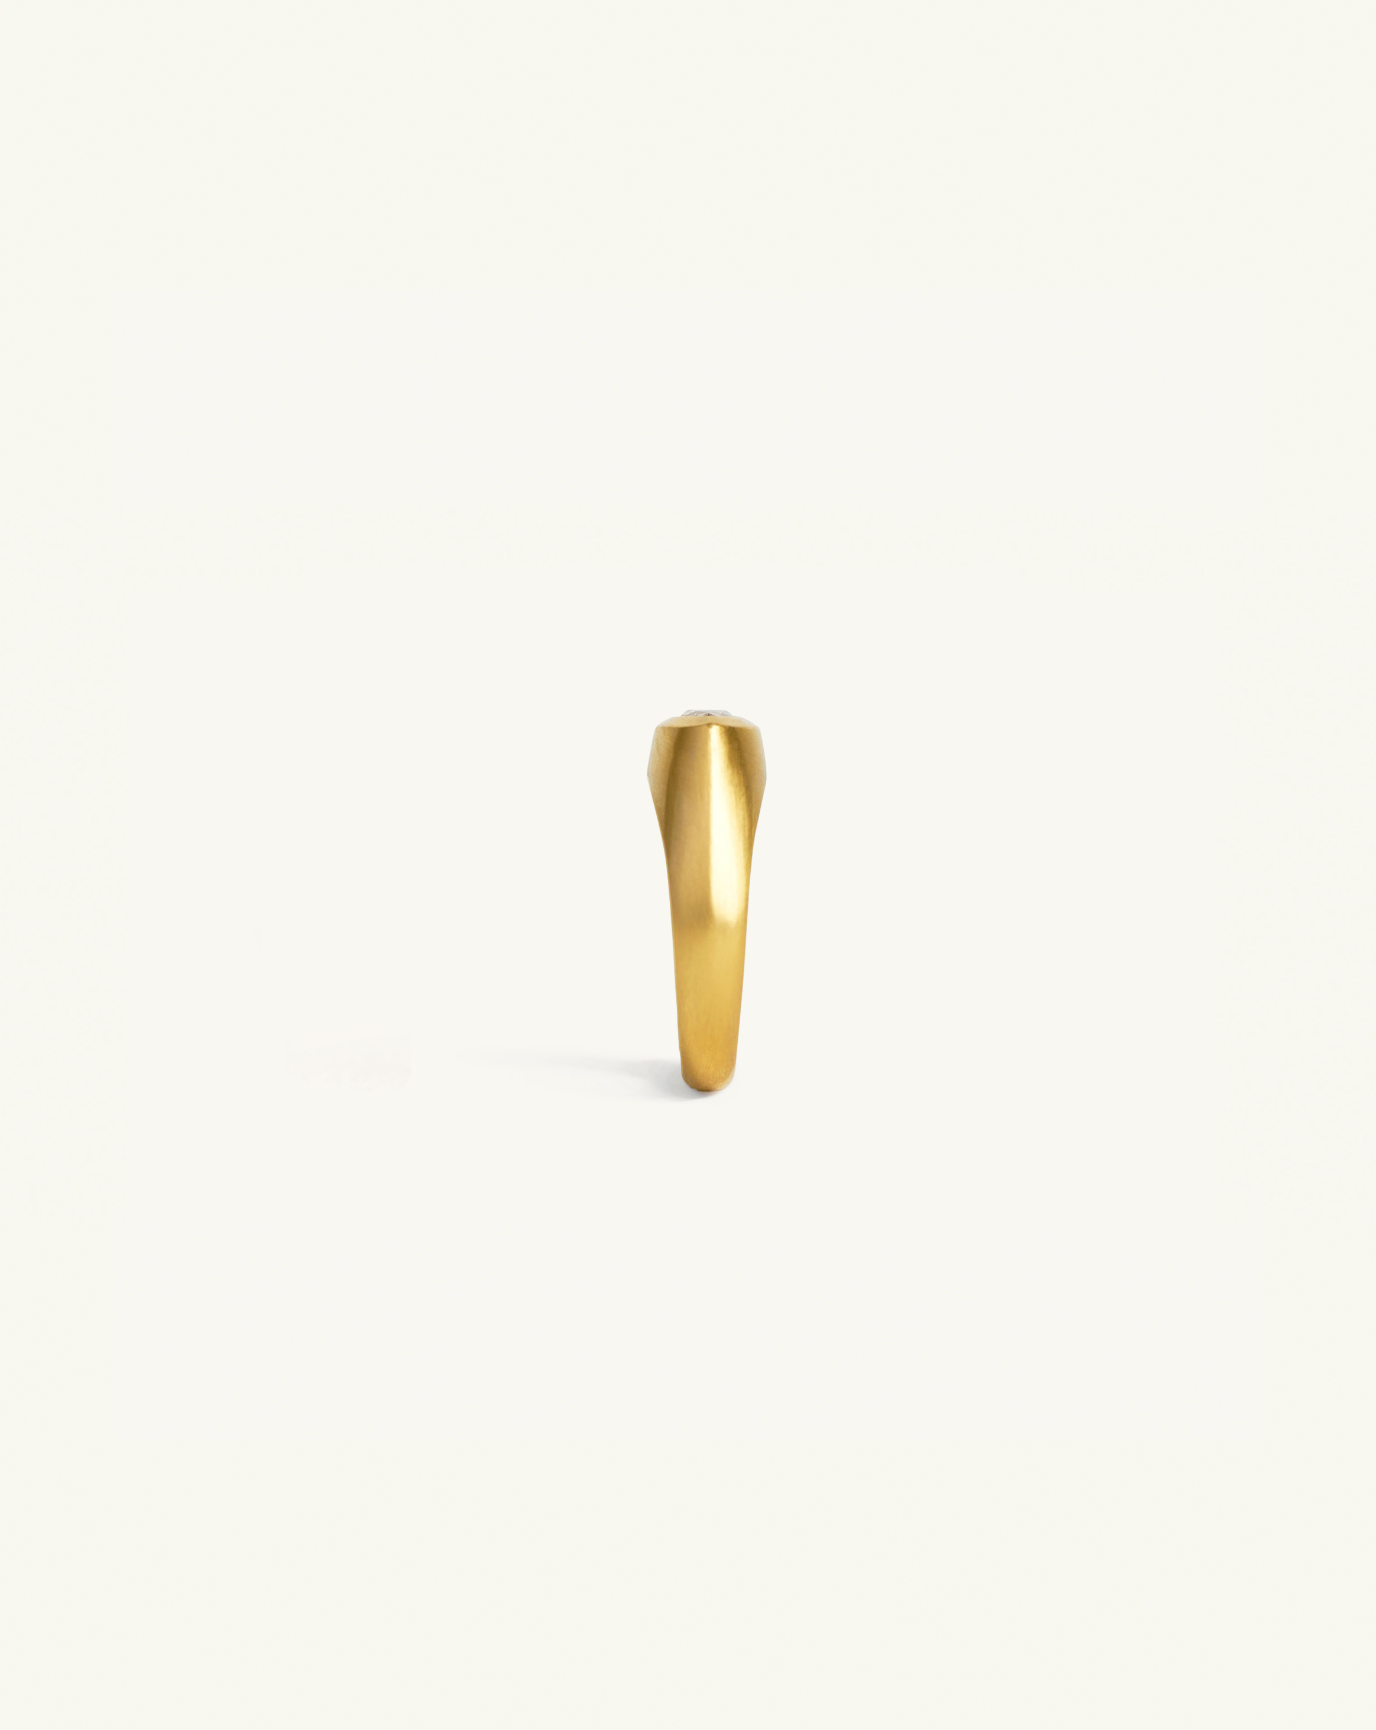 Product image of the sculptural ring in gold with diamond centre